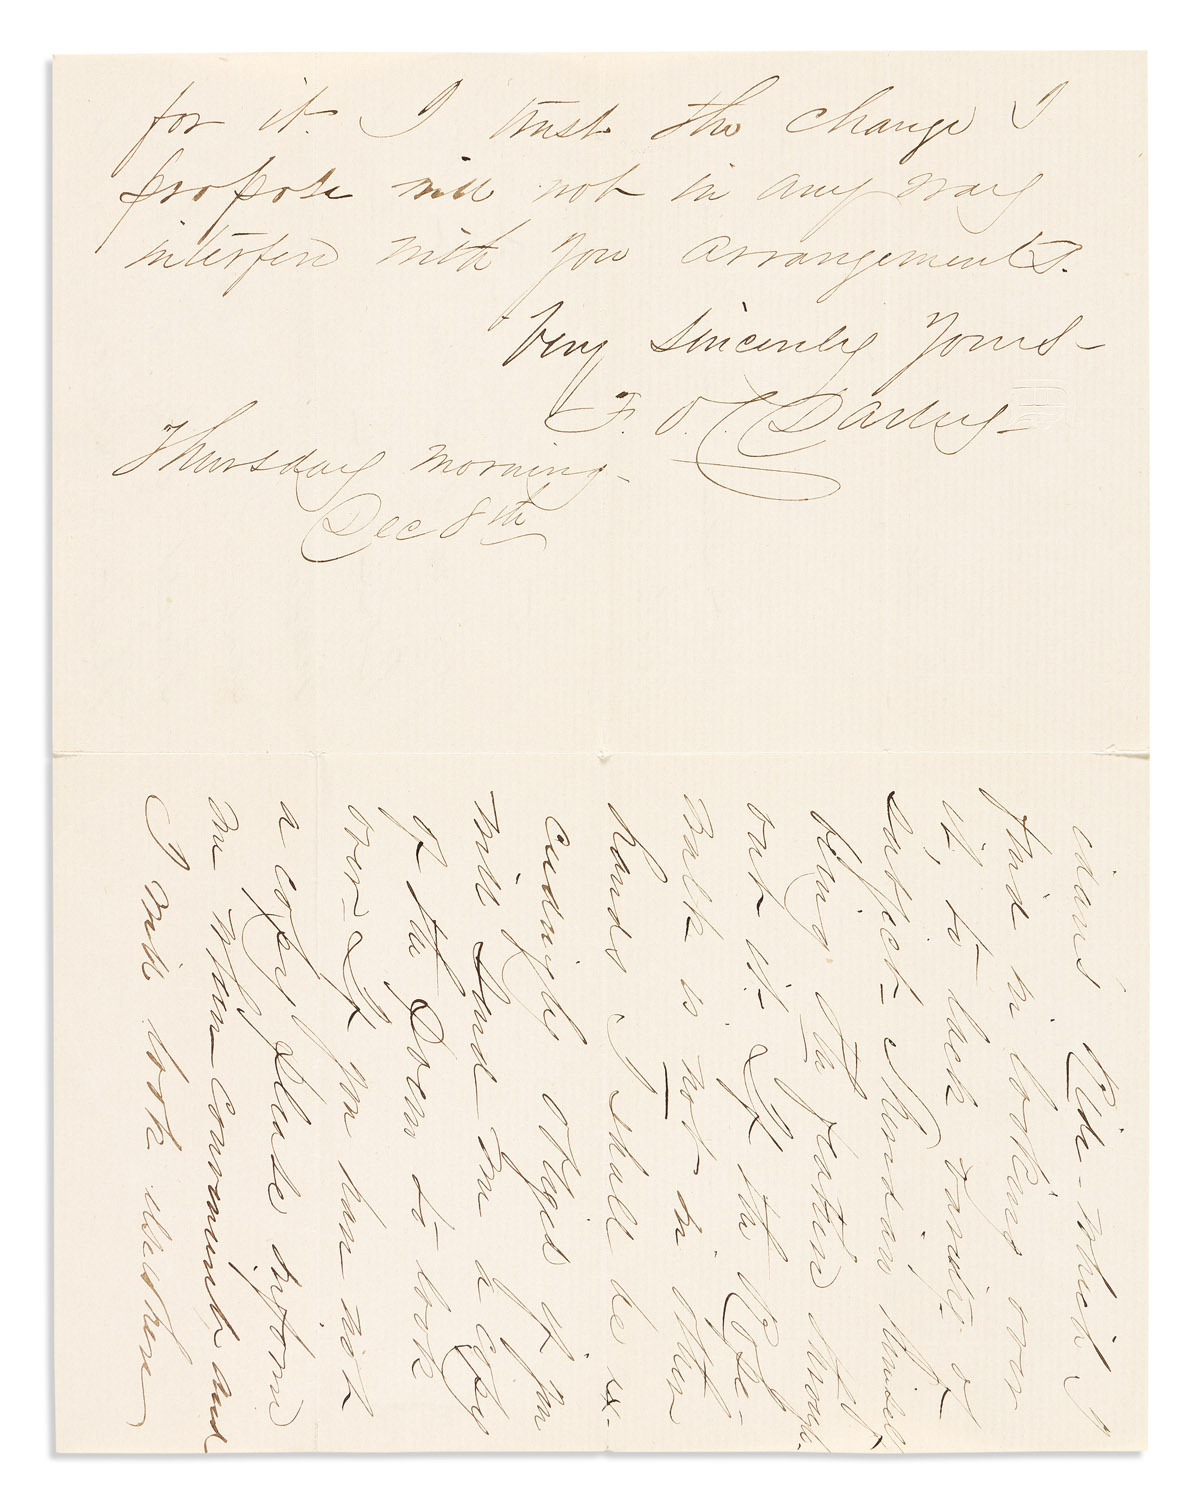 (ARTISTS.) Group of 4 Autograph Letters Signed: John Quincy Adams Ward * Felix Octavius Carr Darley (2) * Daniel Chester French.